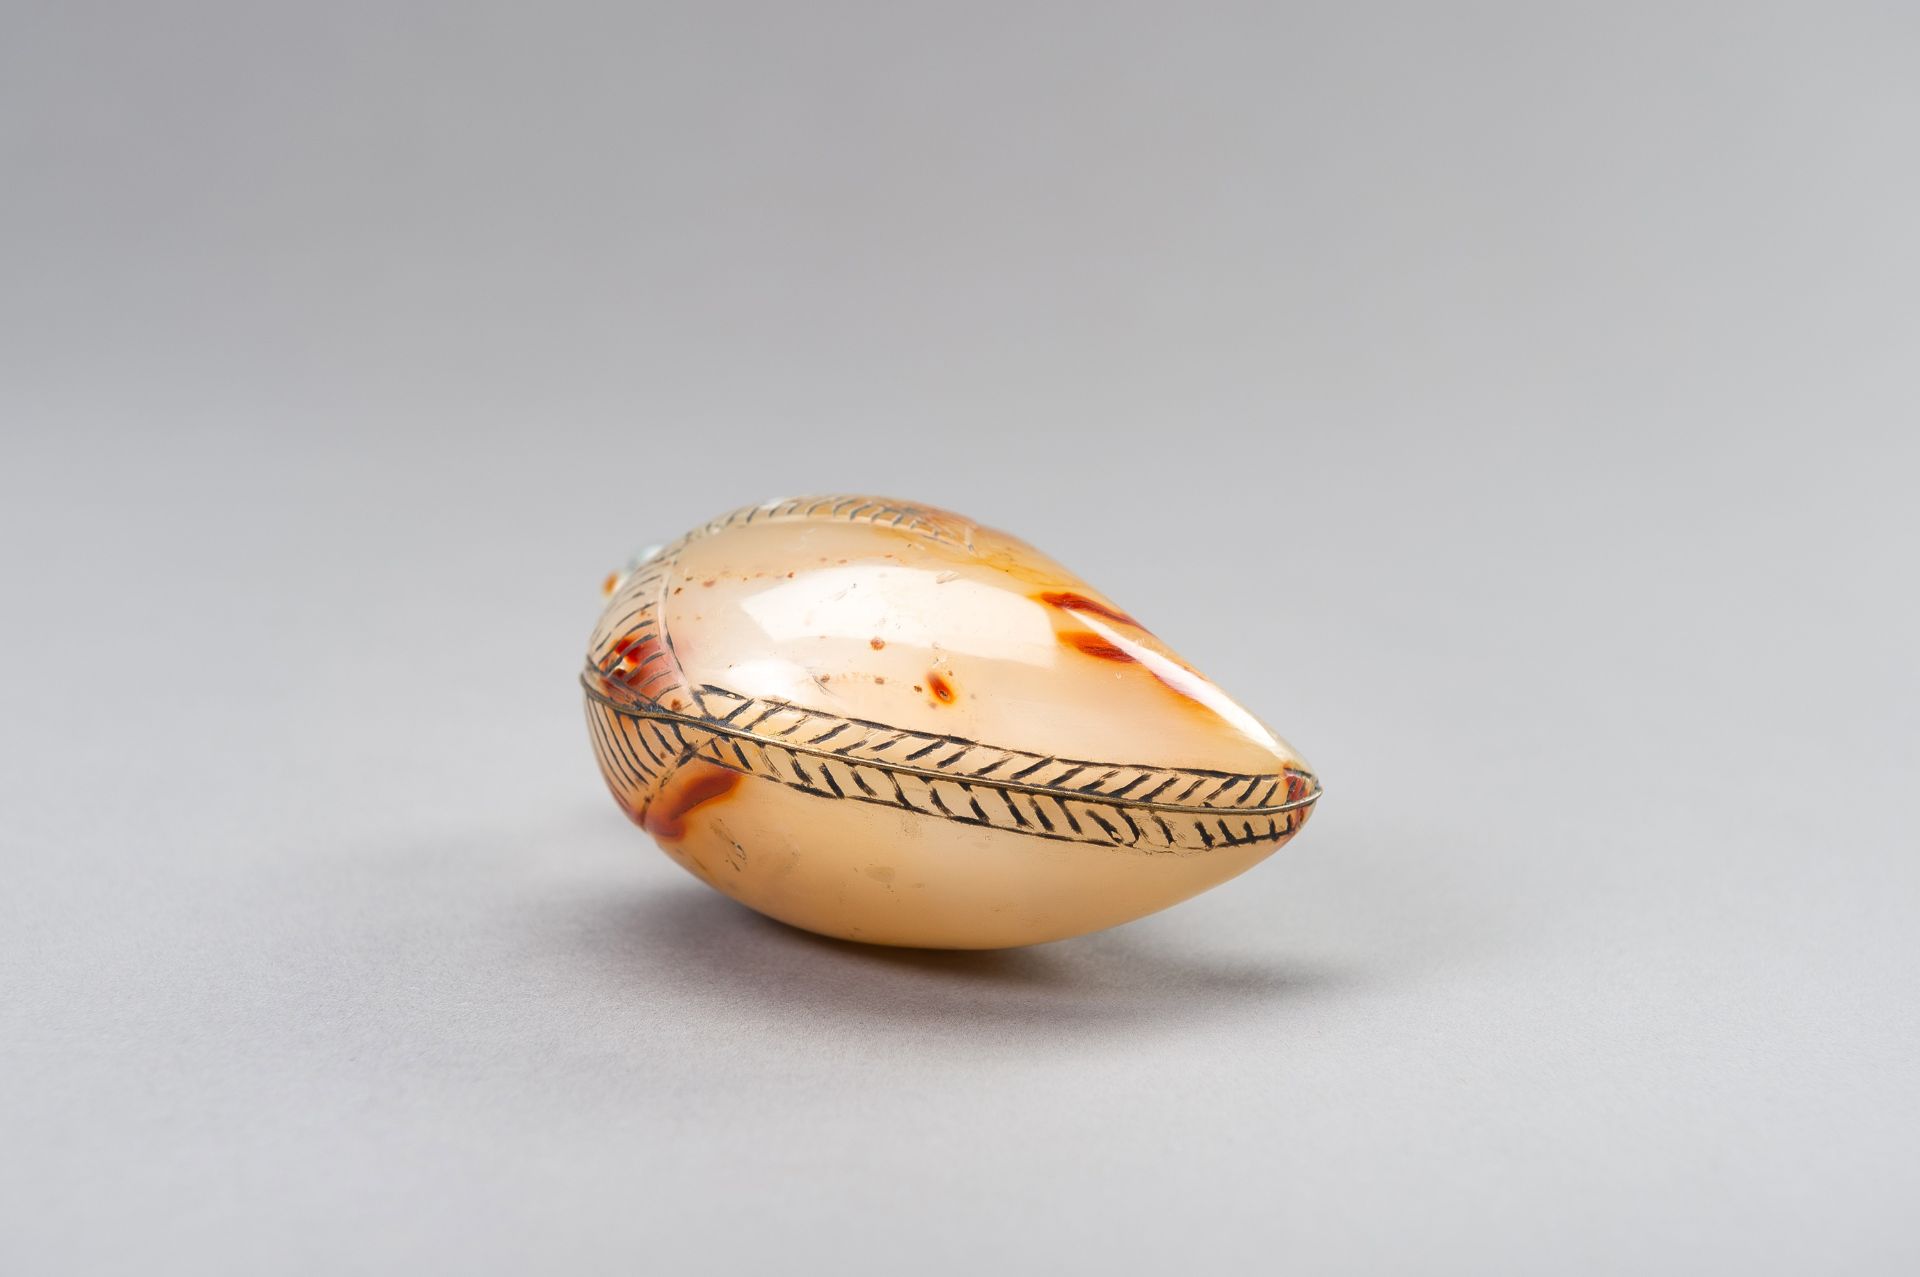 A MUGHAL-STYLE AGATE PERFUME BOTTLE - Image 6 of 12